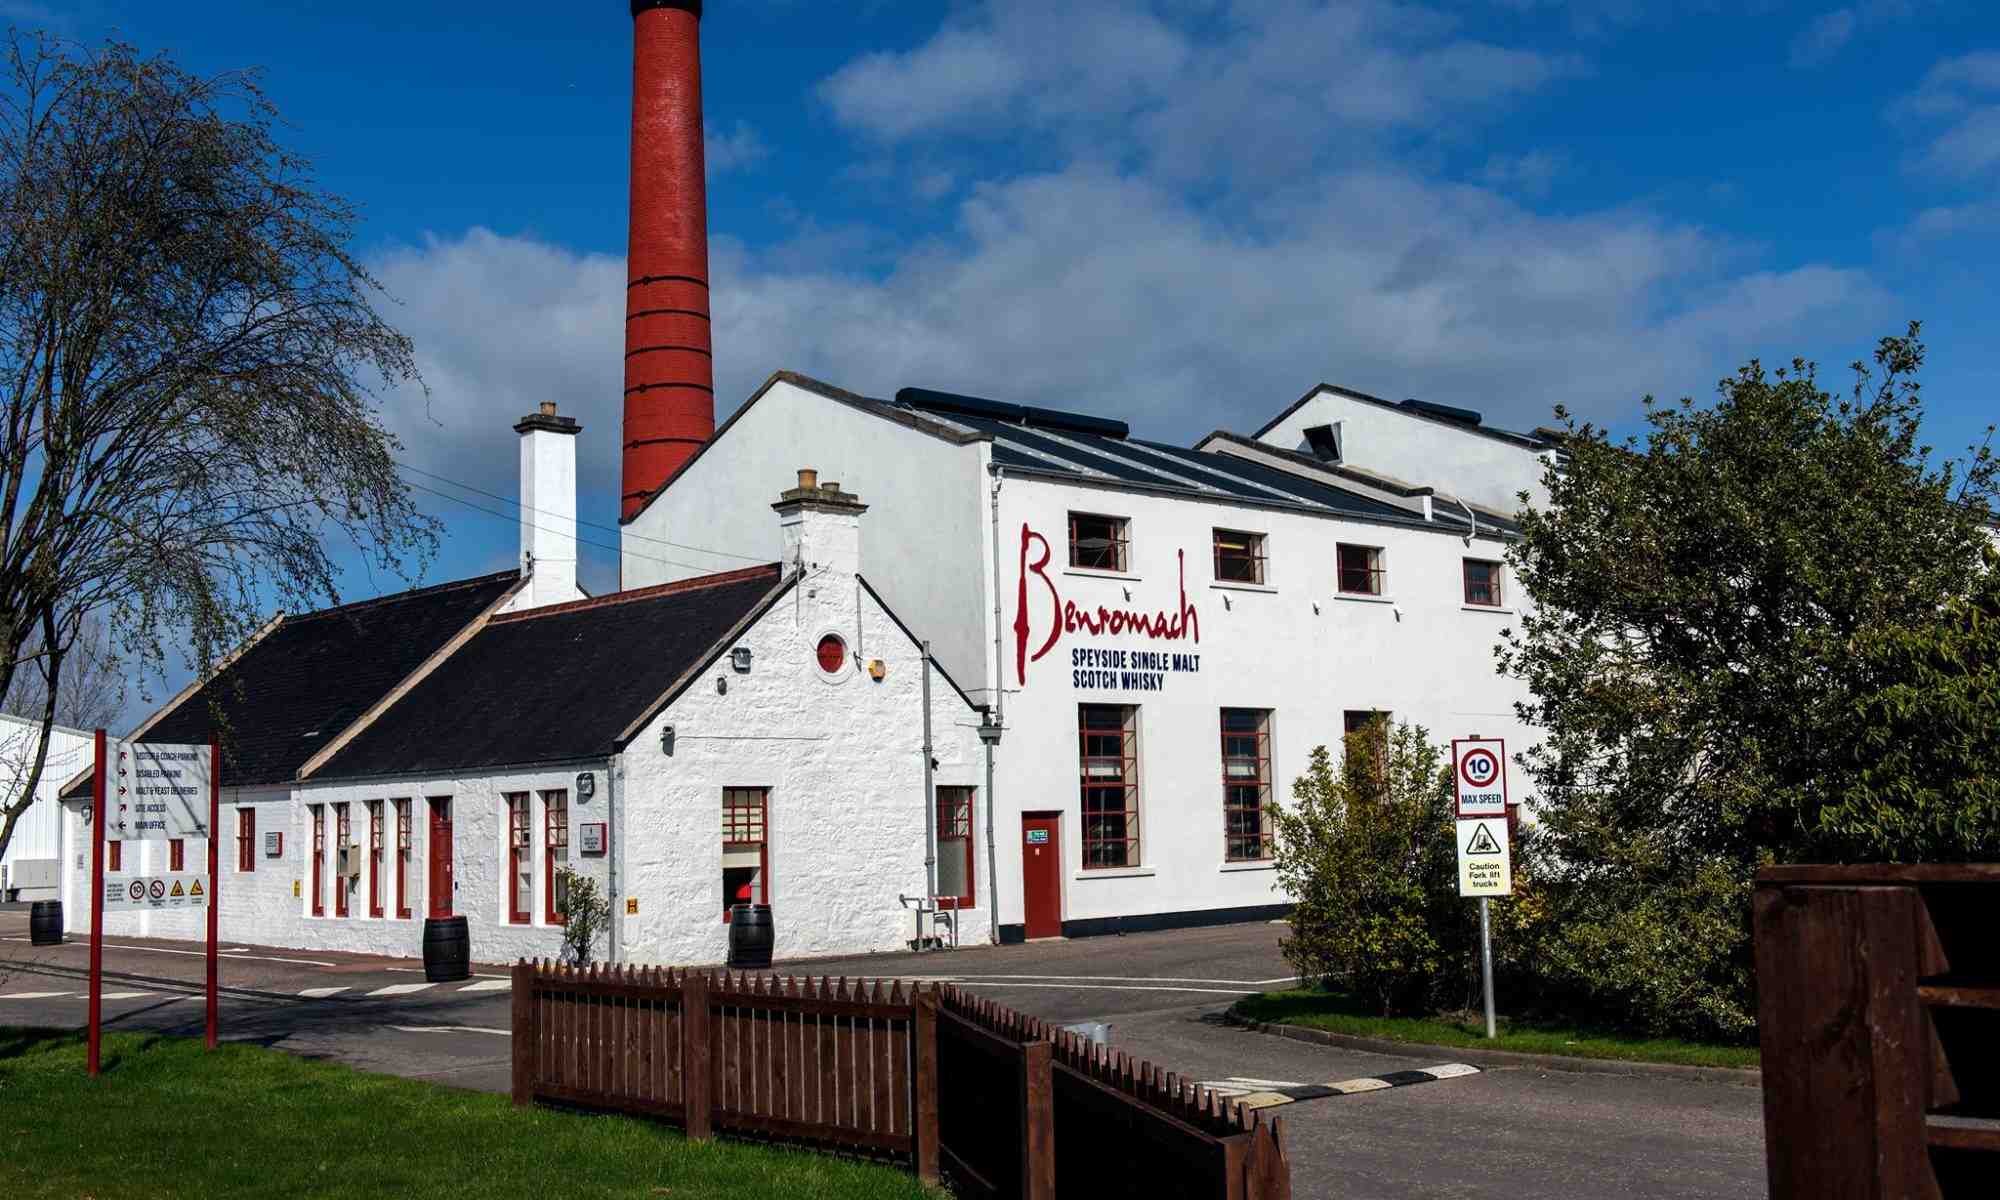 Benromach Distillery and Visitor Centre